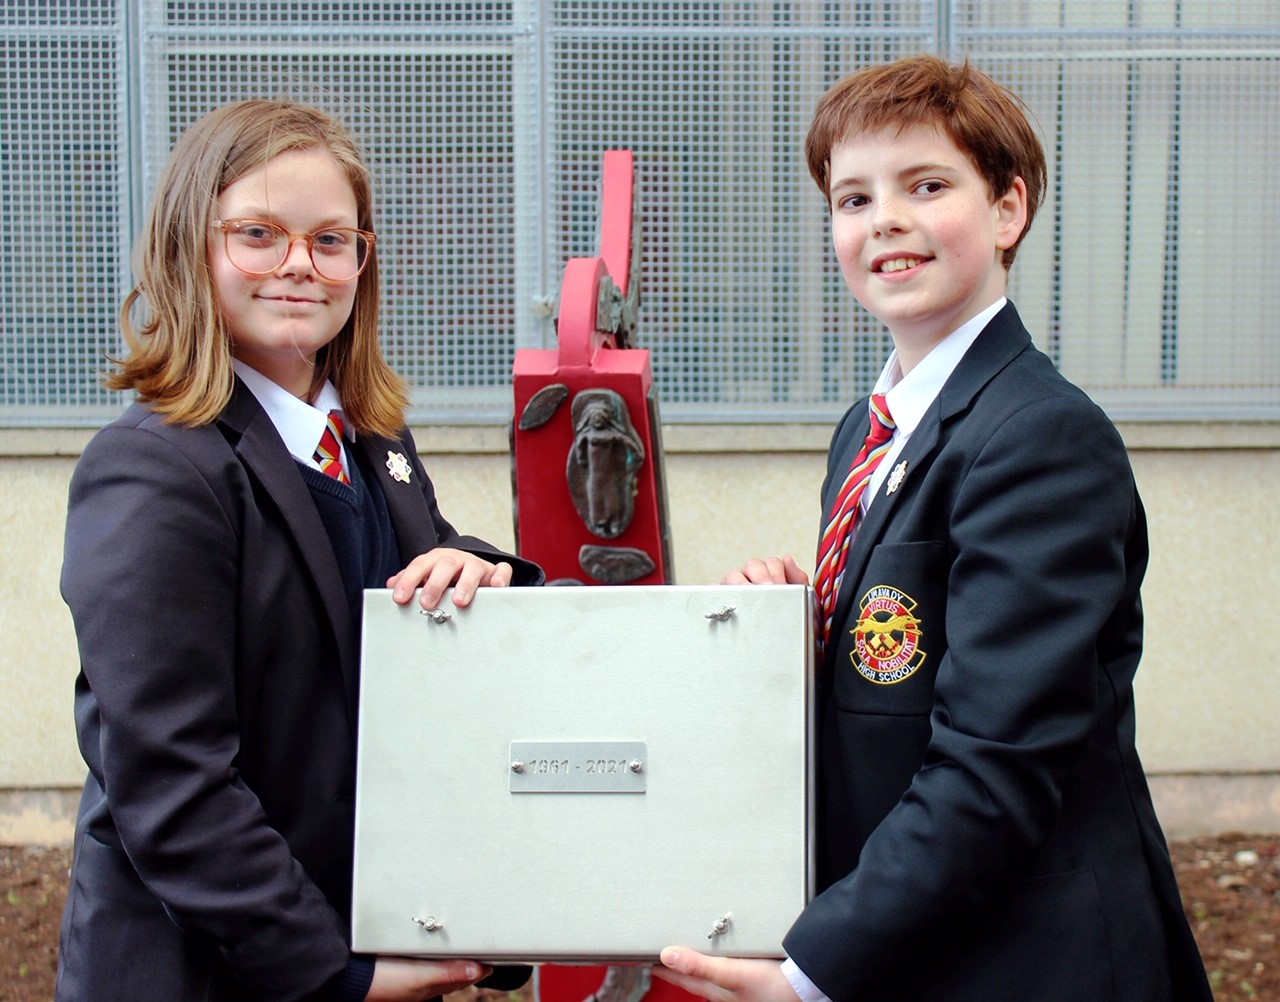 LHS year 8 time capsule